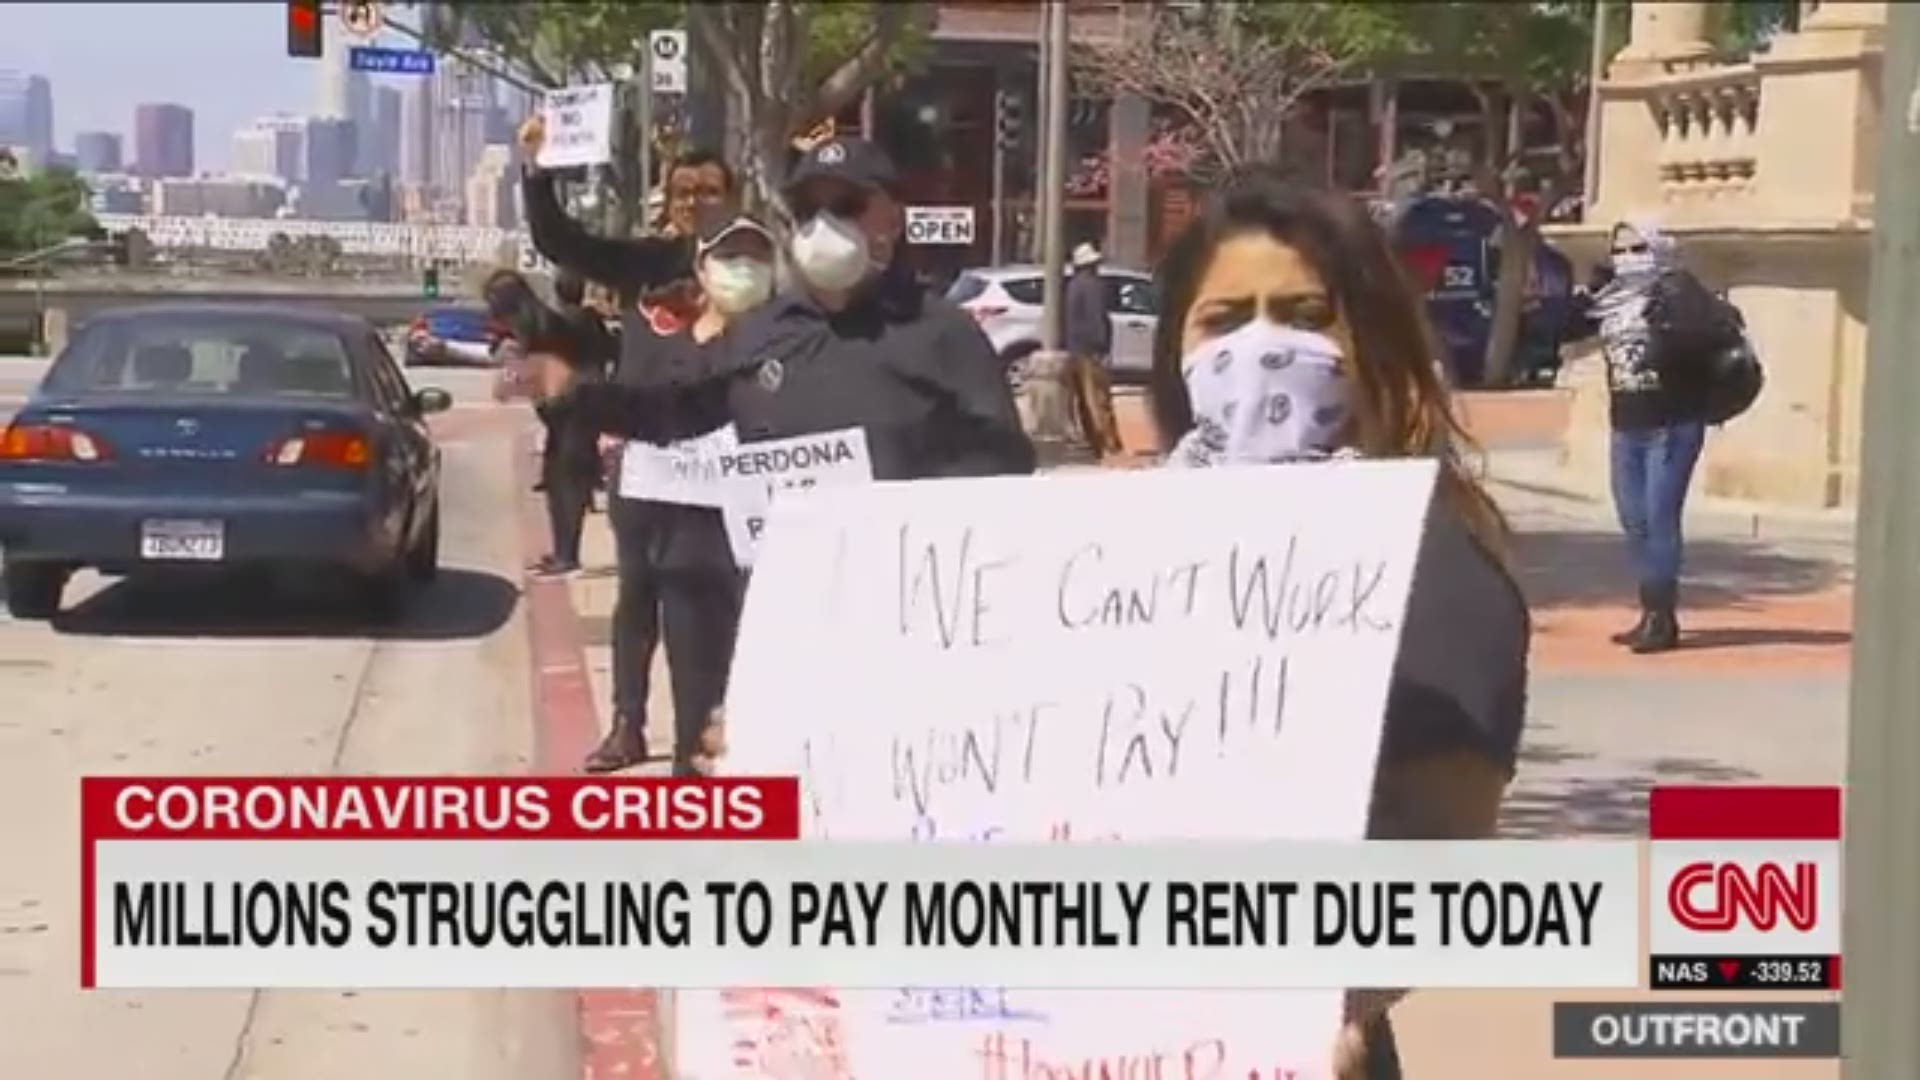 As April begins, millions across the US are struggling to pay monthly rent during the coronavirus pandemic.